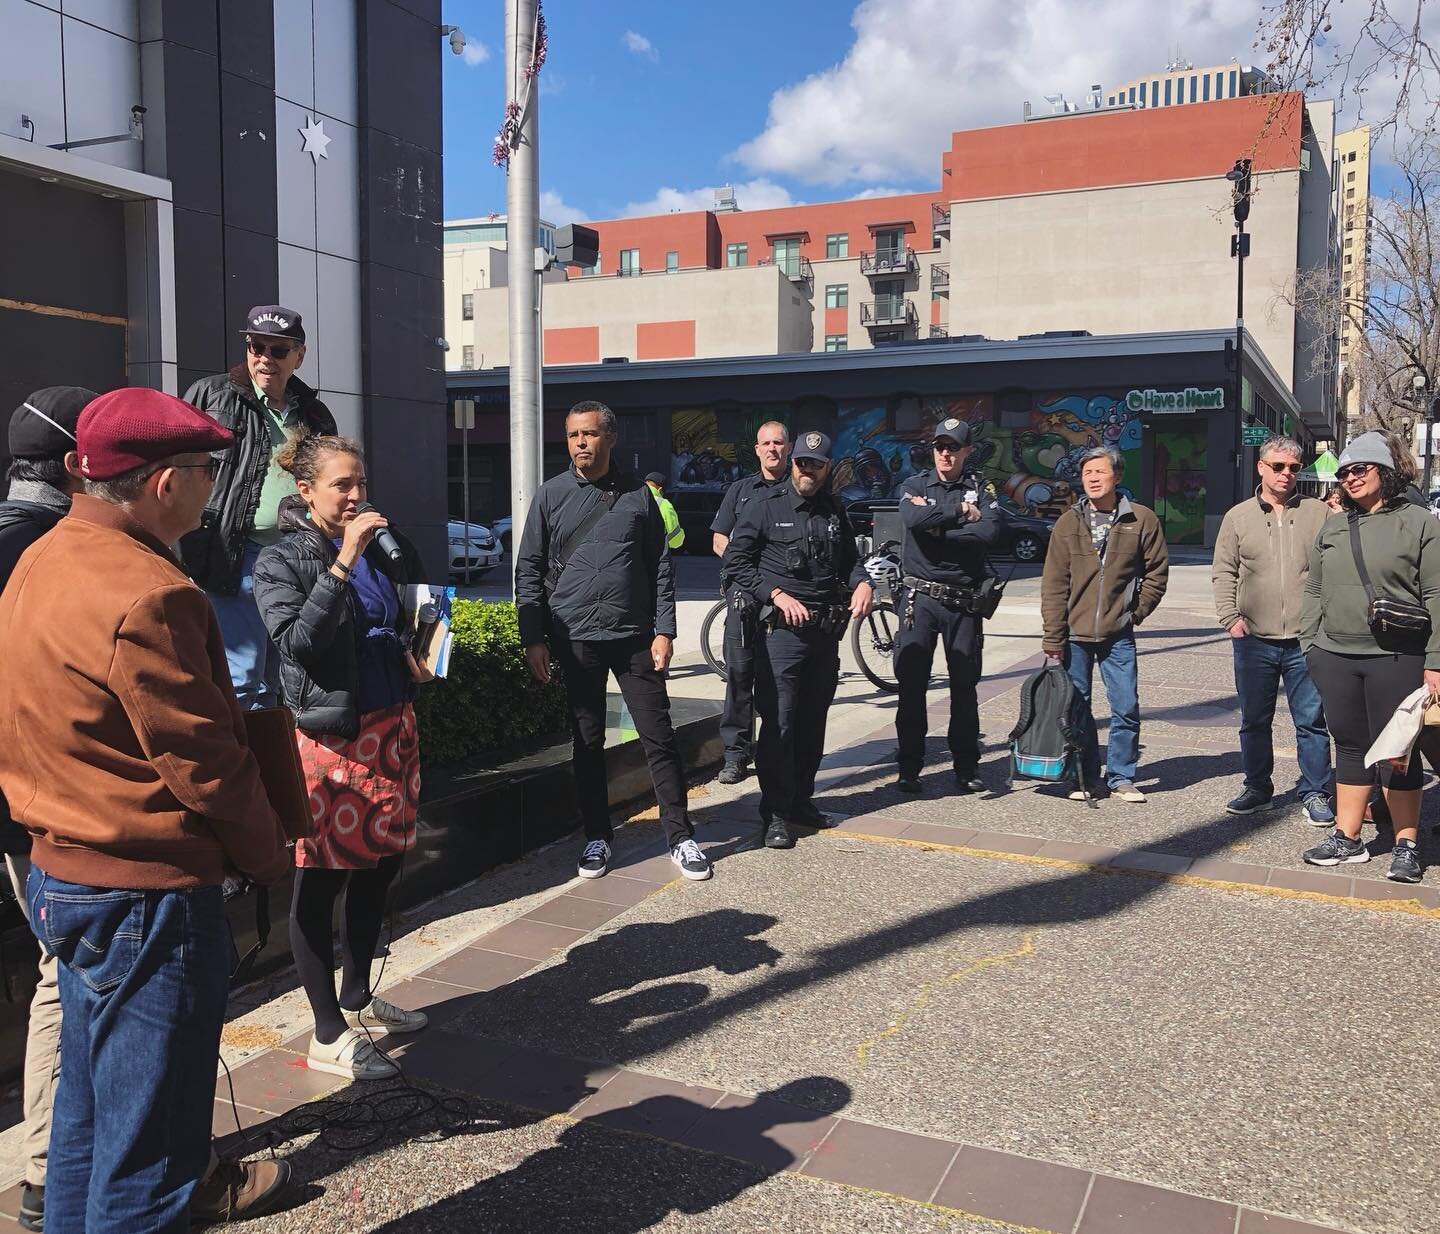 A big thank you to all who joined our walking meeting through the connecting corners of the Jack London, Chinatown, and Downtown BIDs here in Oakland last Friday. 

The rain took a pause while we met with leaders from each of these districts, as well